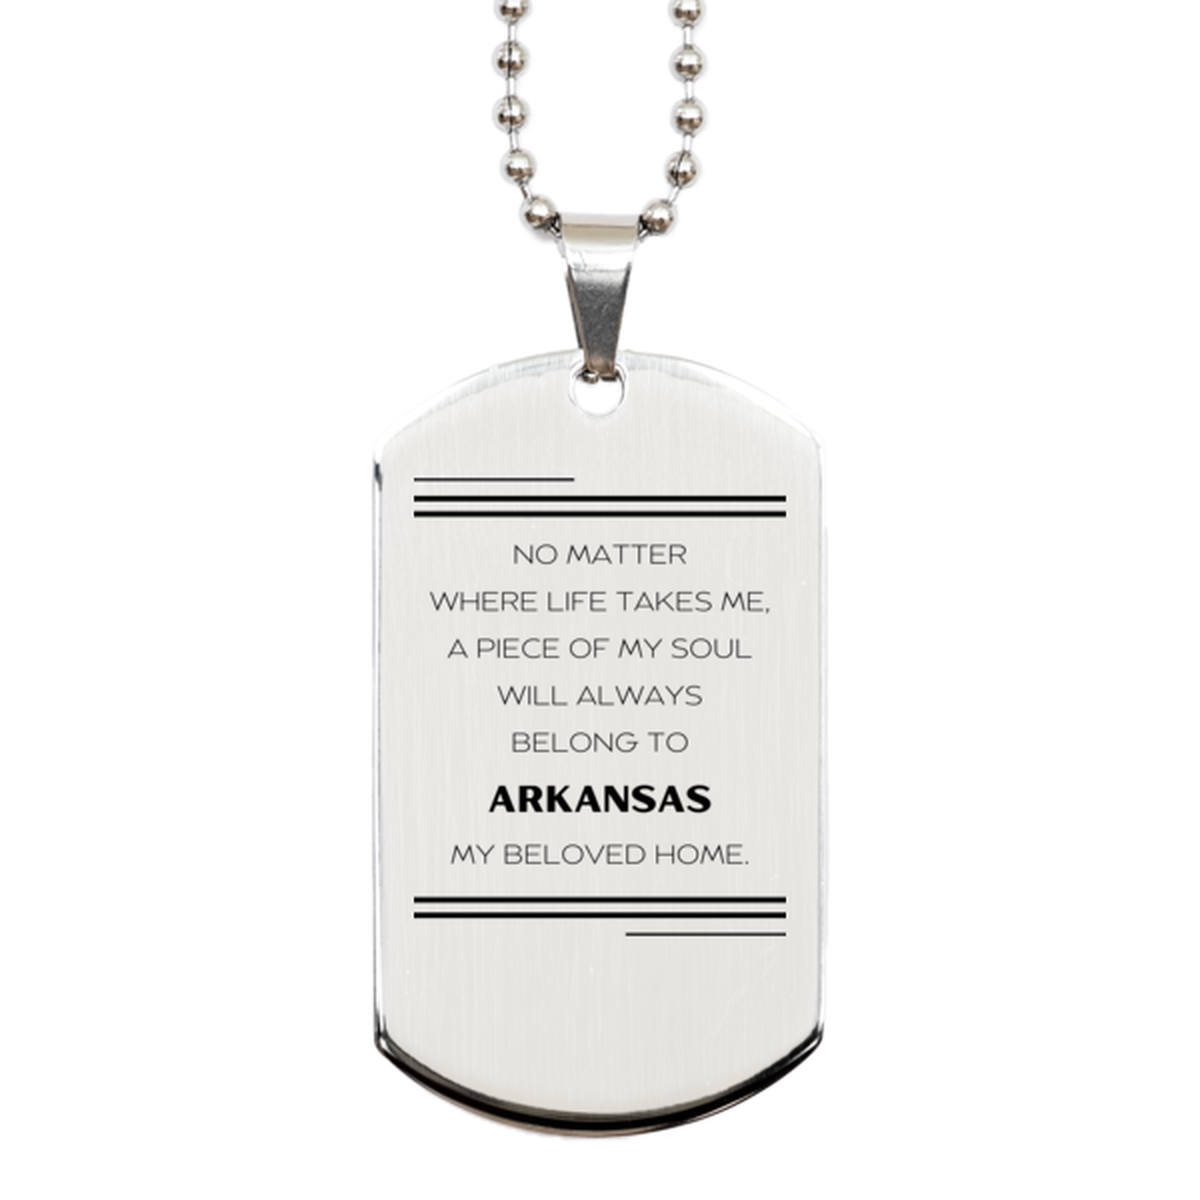 Love Arkansas State Gifts, My soul will always belong to Arkansas, Proud Silver Dog Tag, Birthday Unique Gifts For Arkansas Men, Women, Friends